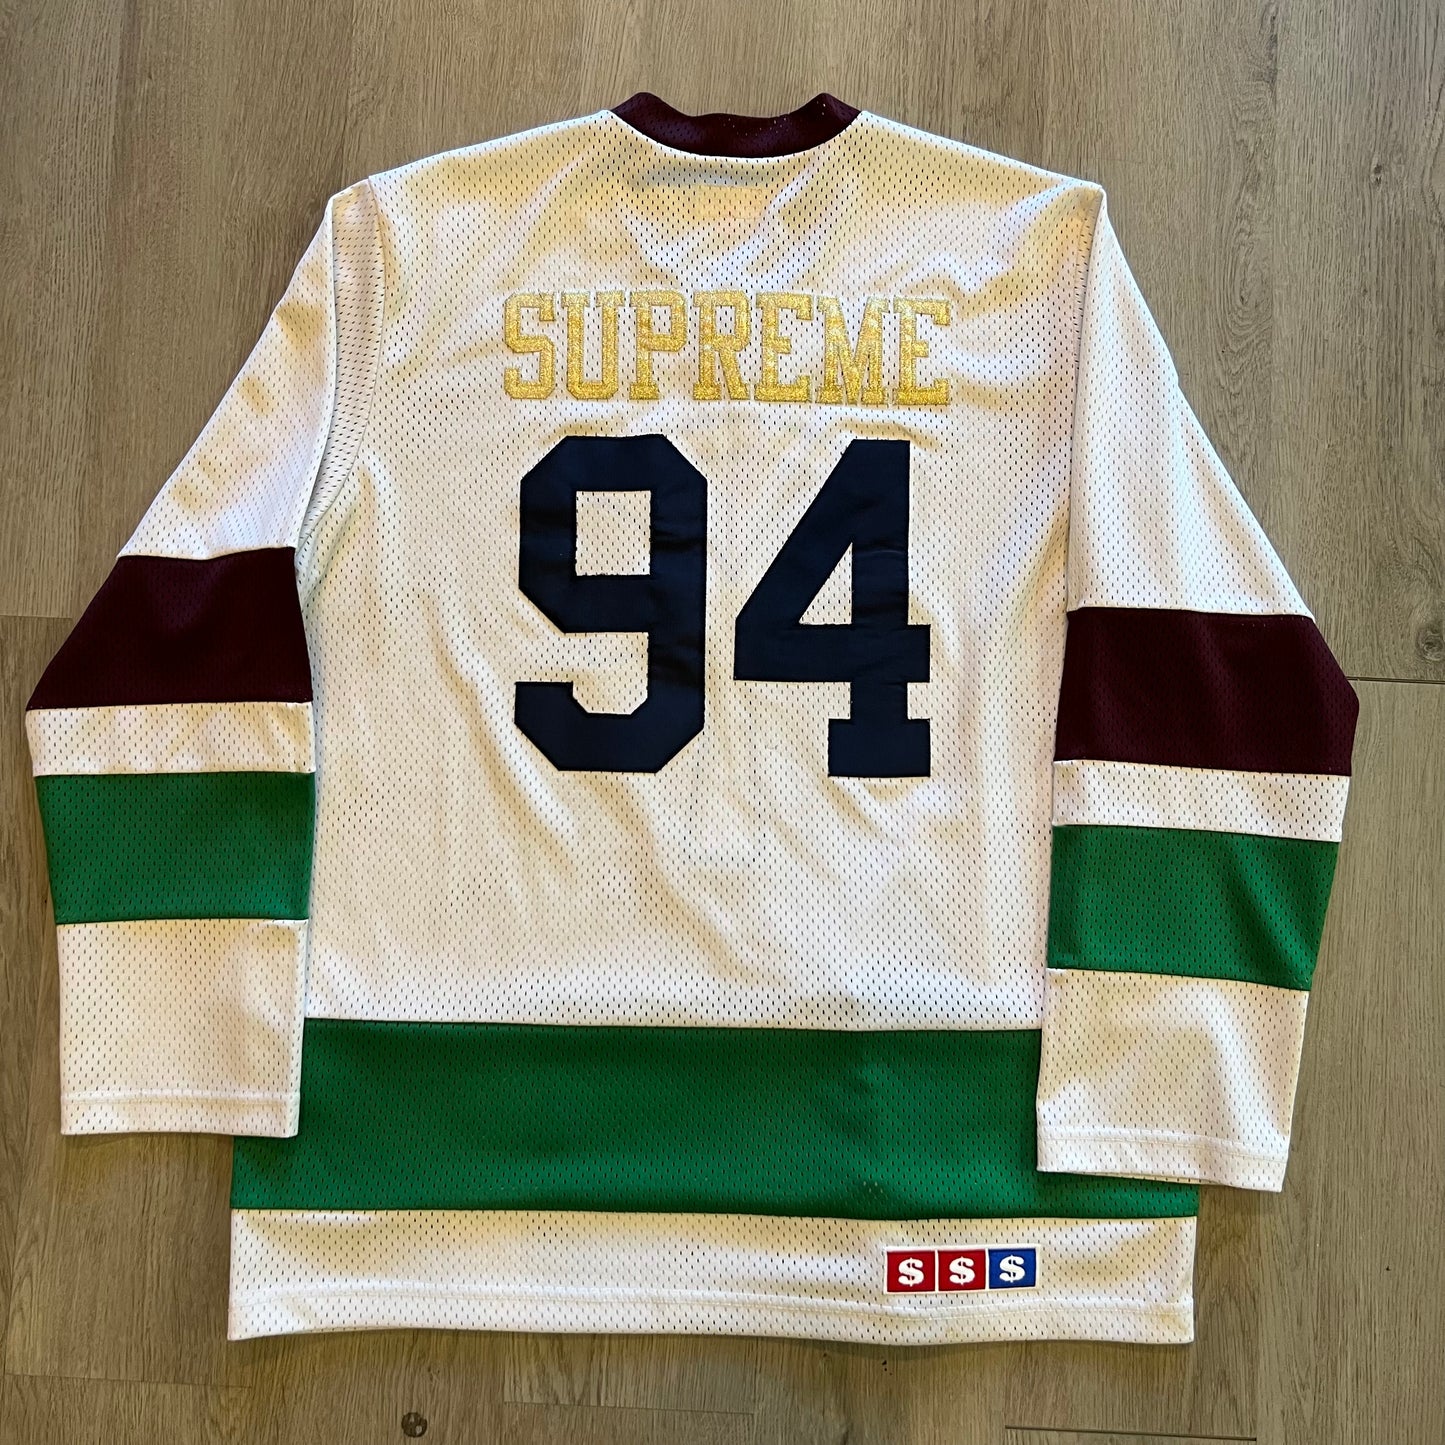 Supreme Ankh Hockey Jersey White - Preowned